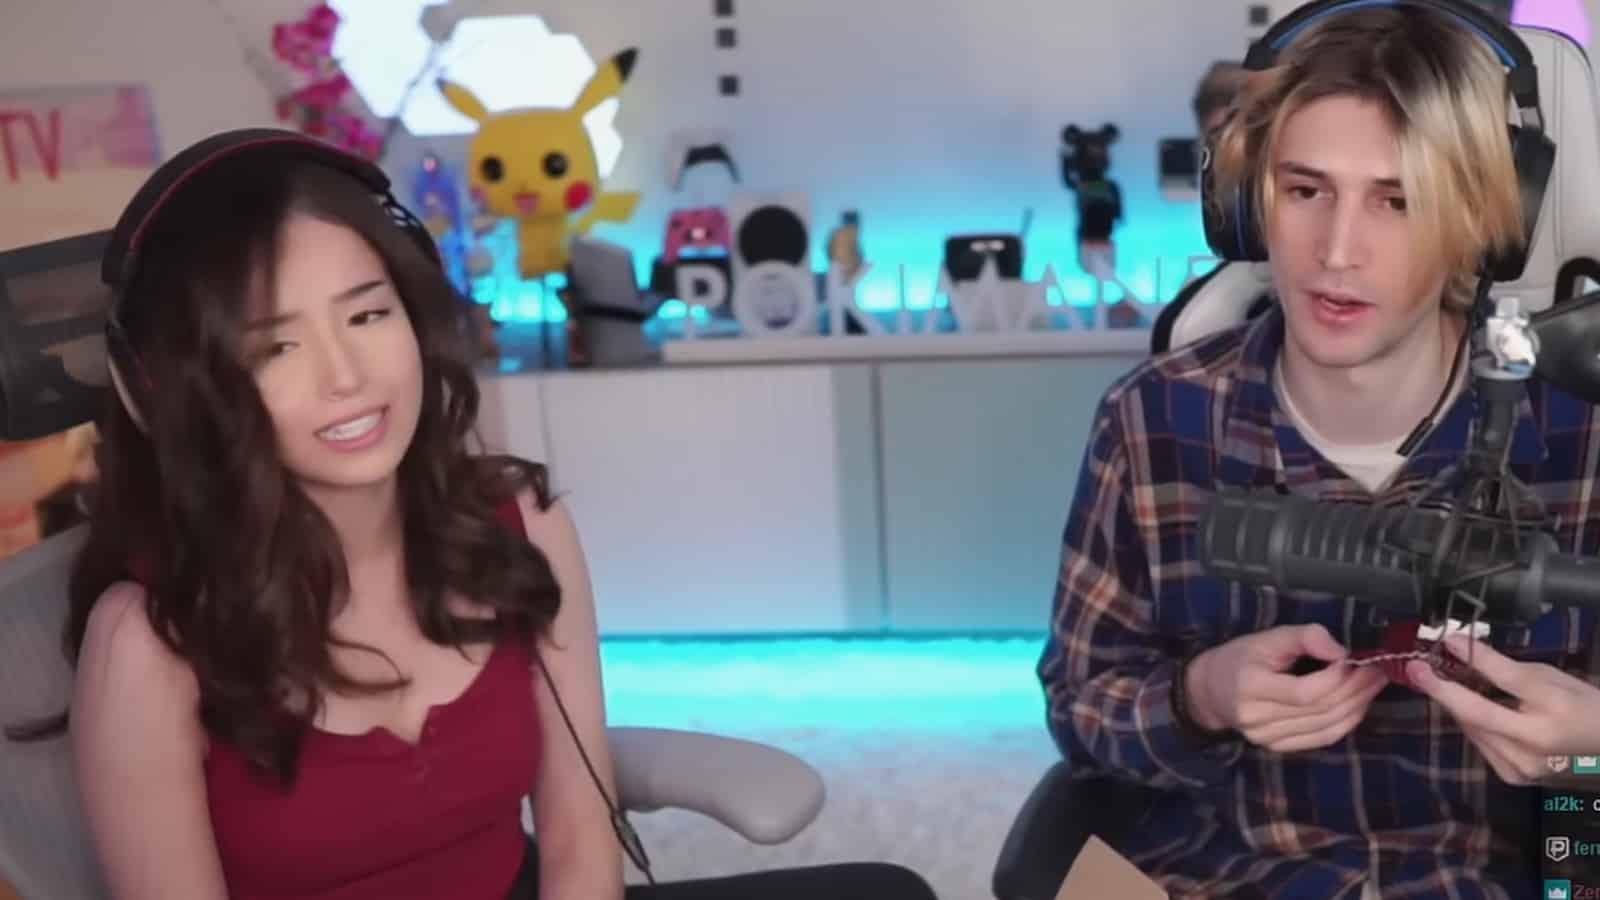 Pokimane and xQc joint stream